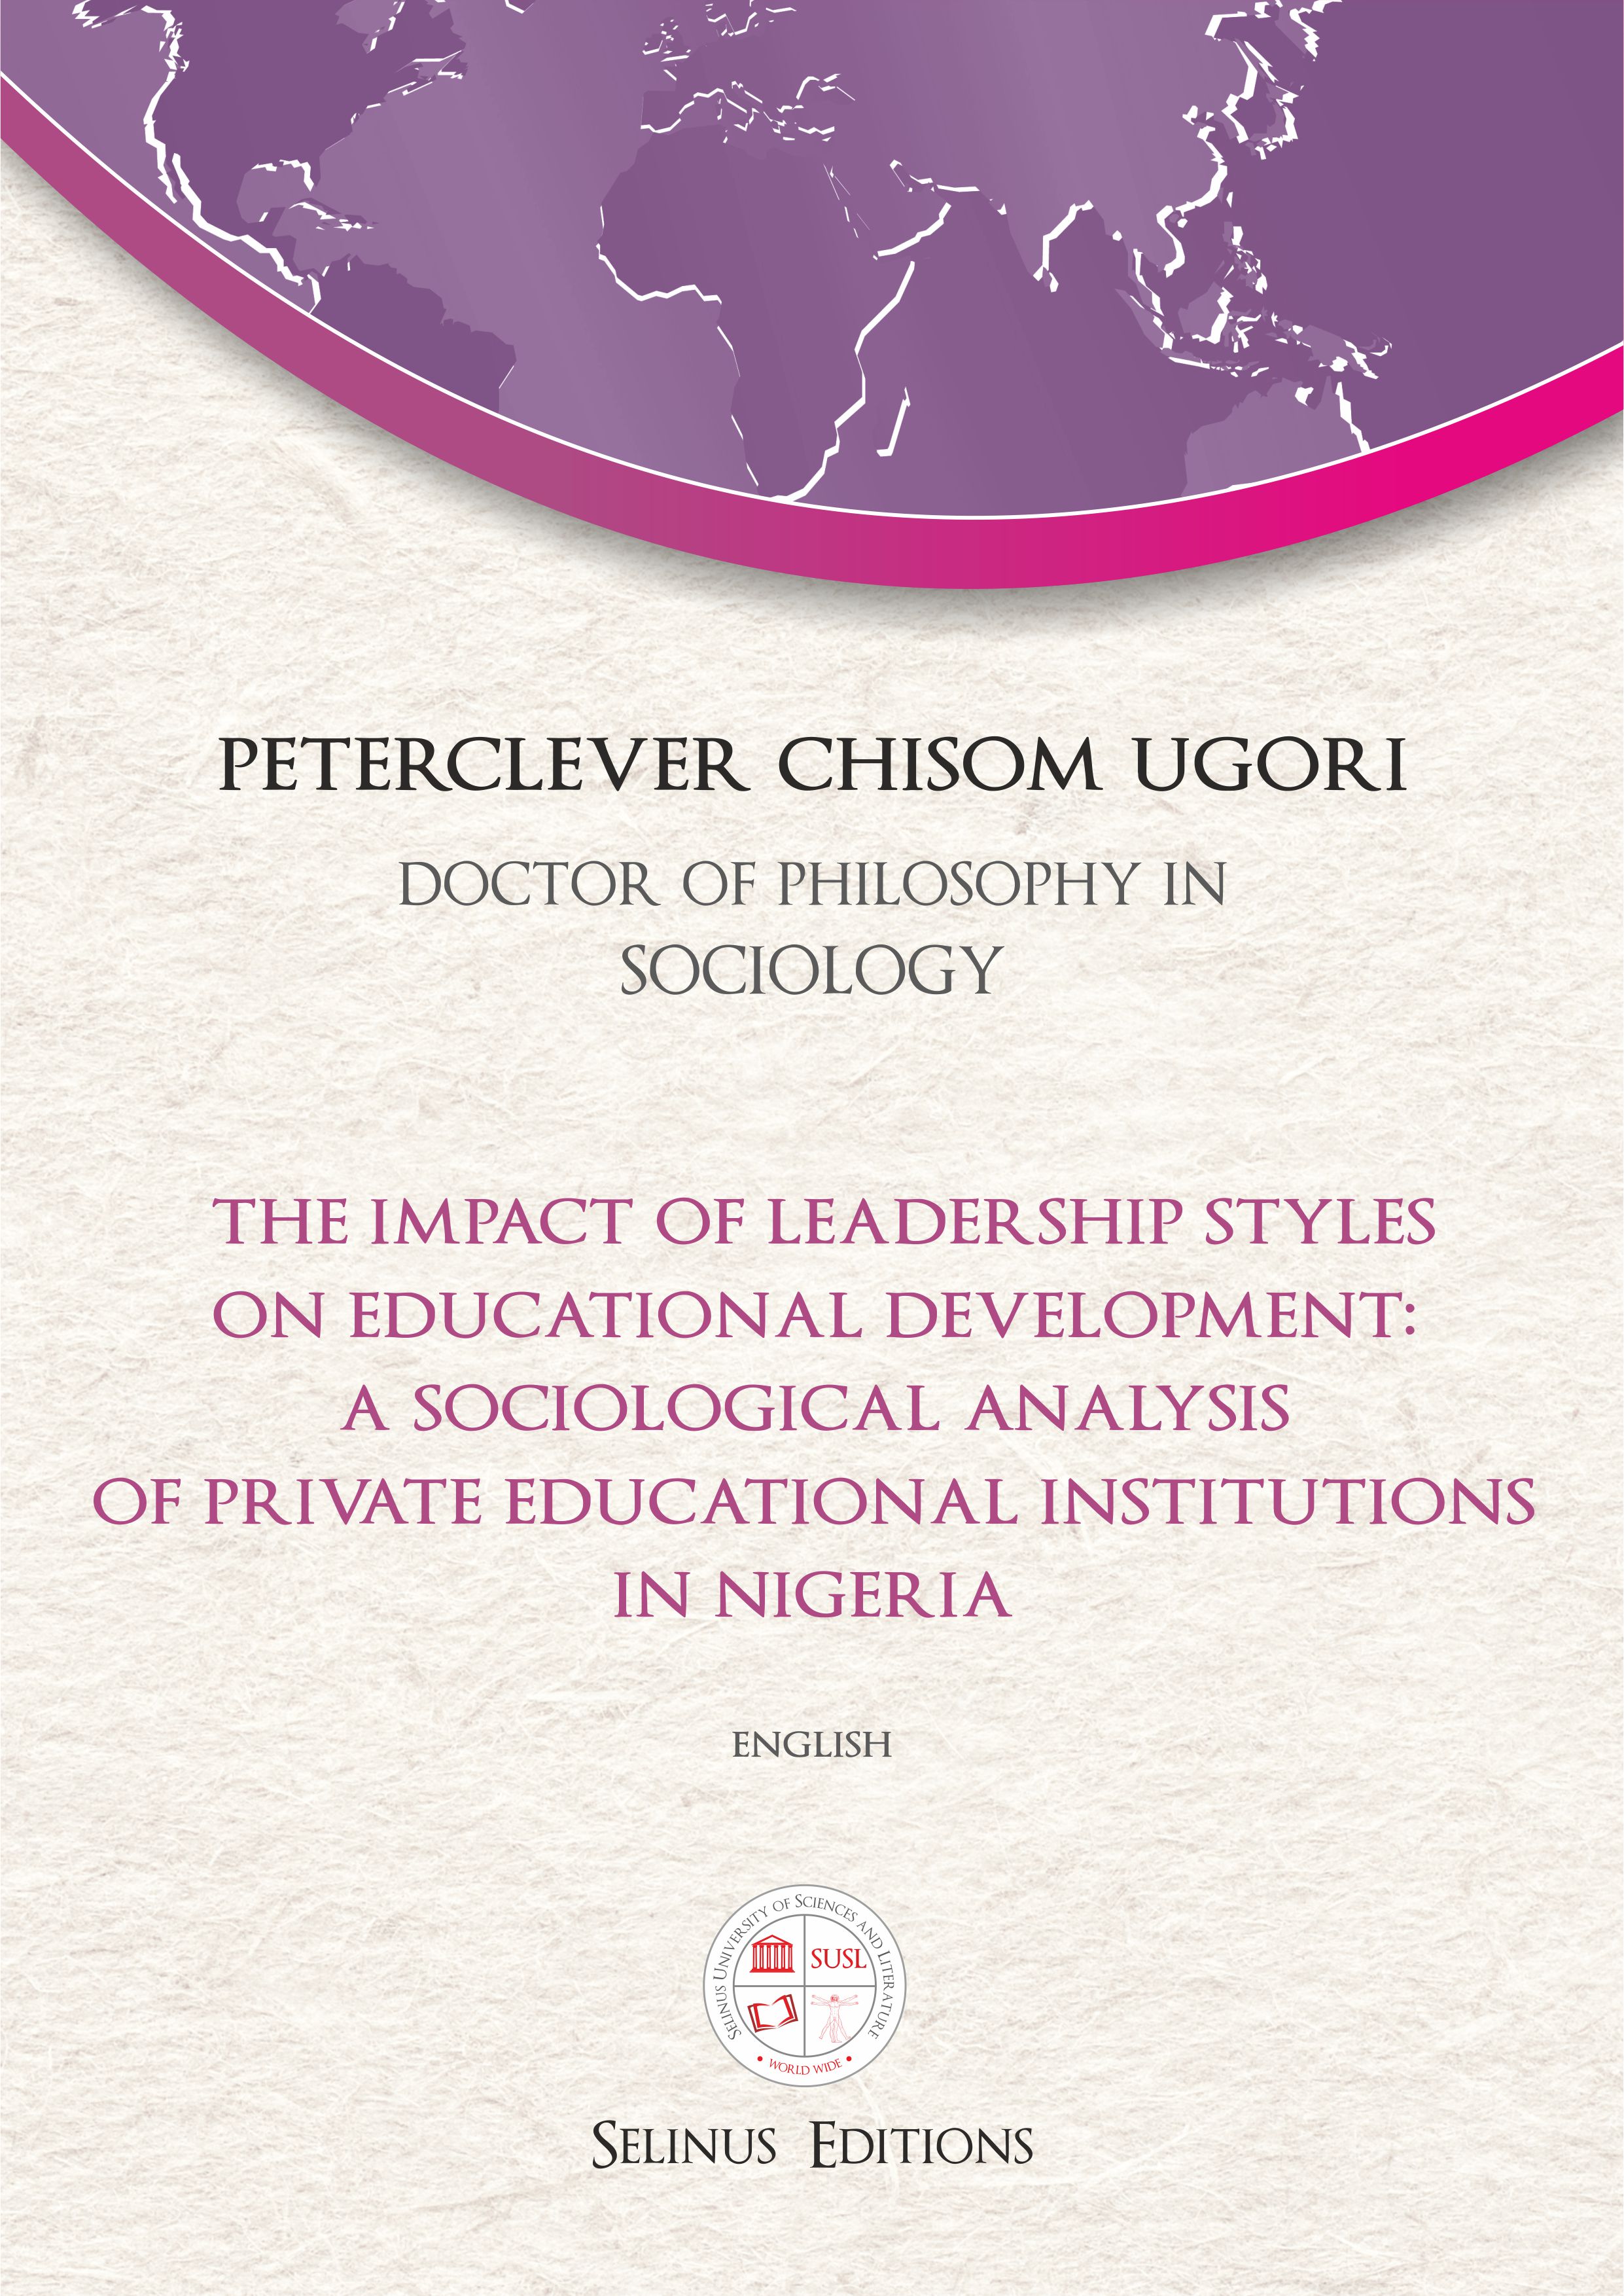 Thesis Peterclever Chisom Ugori